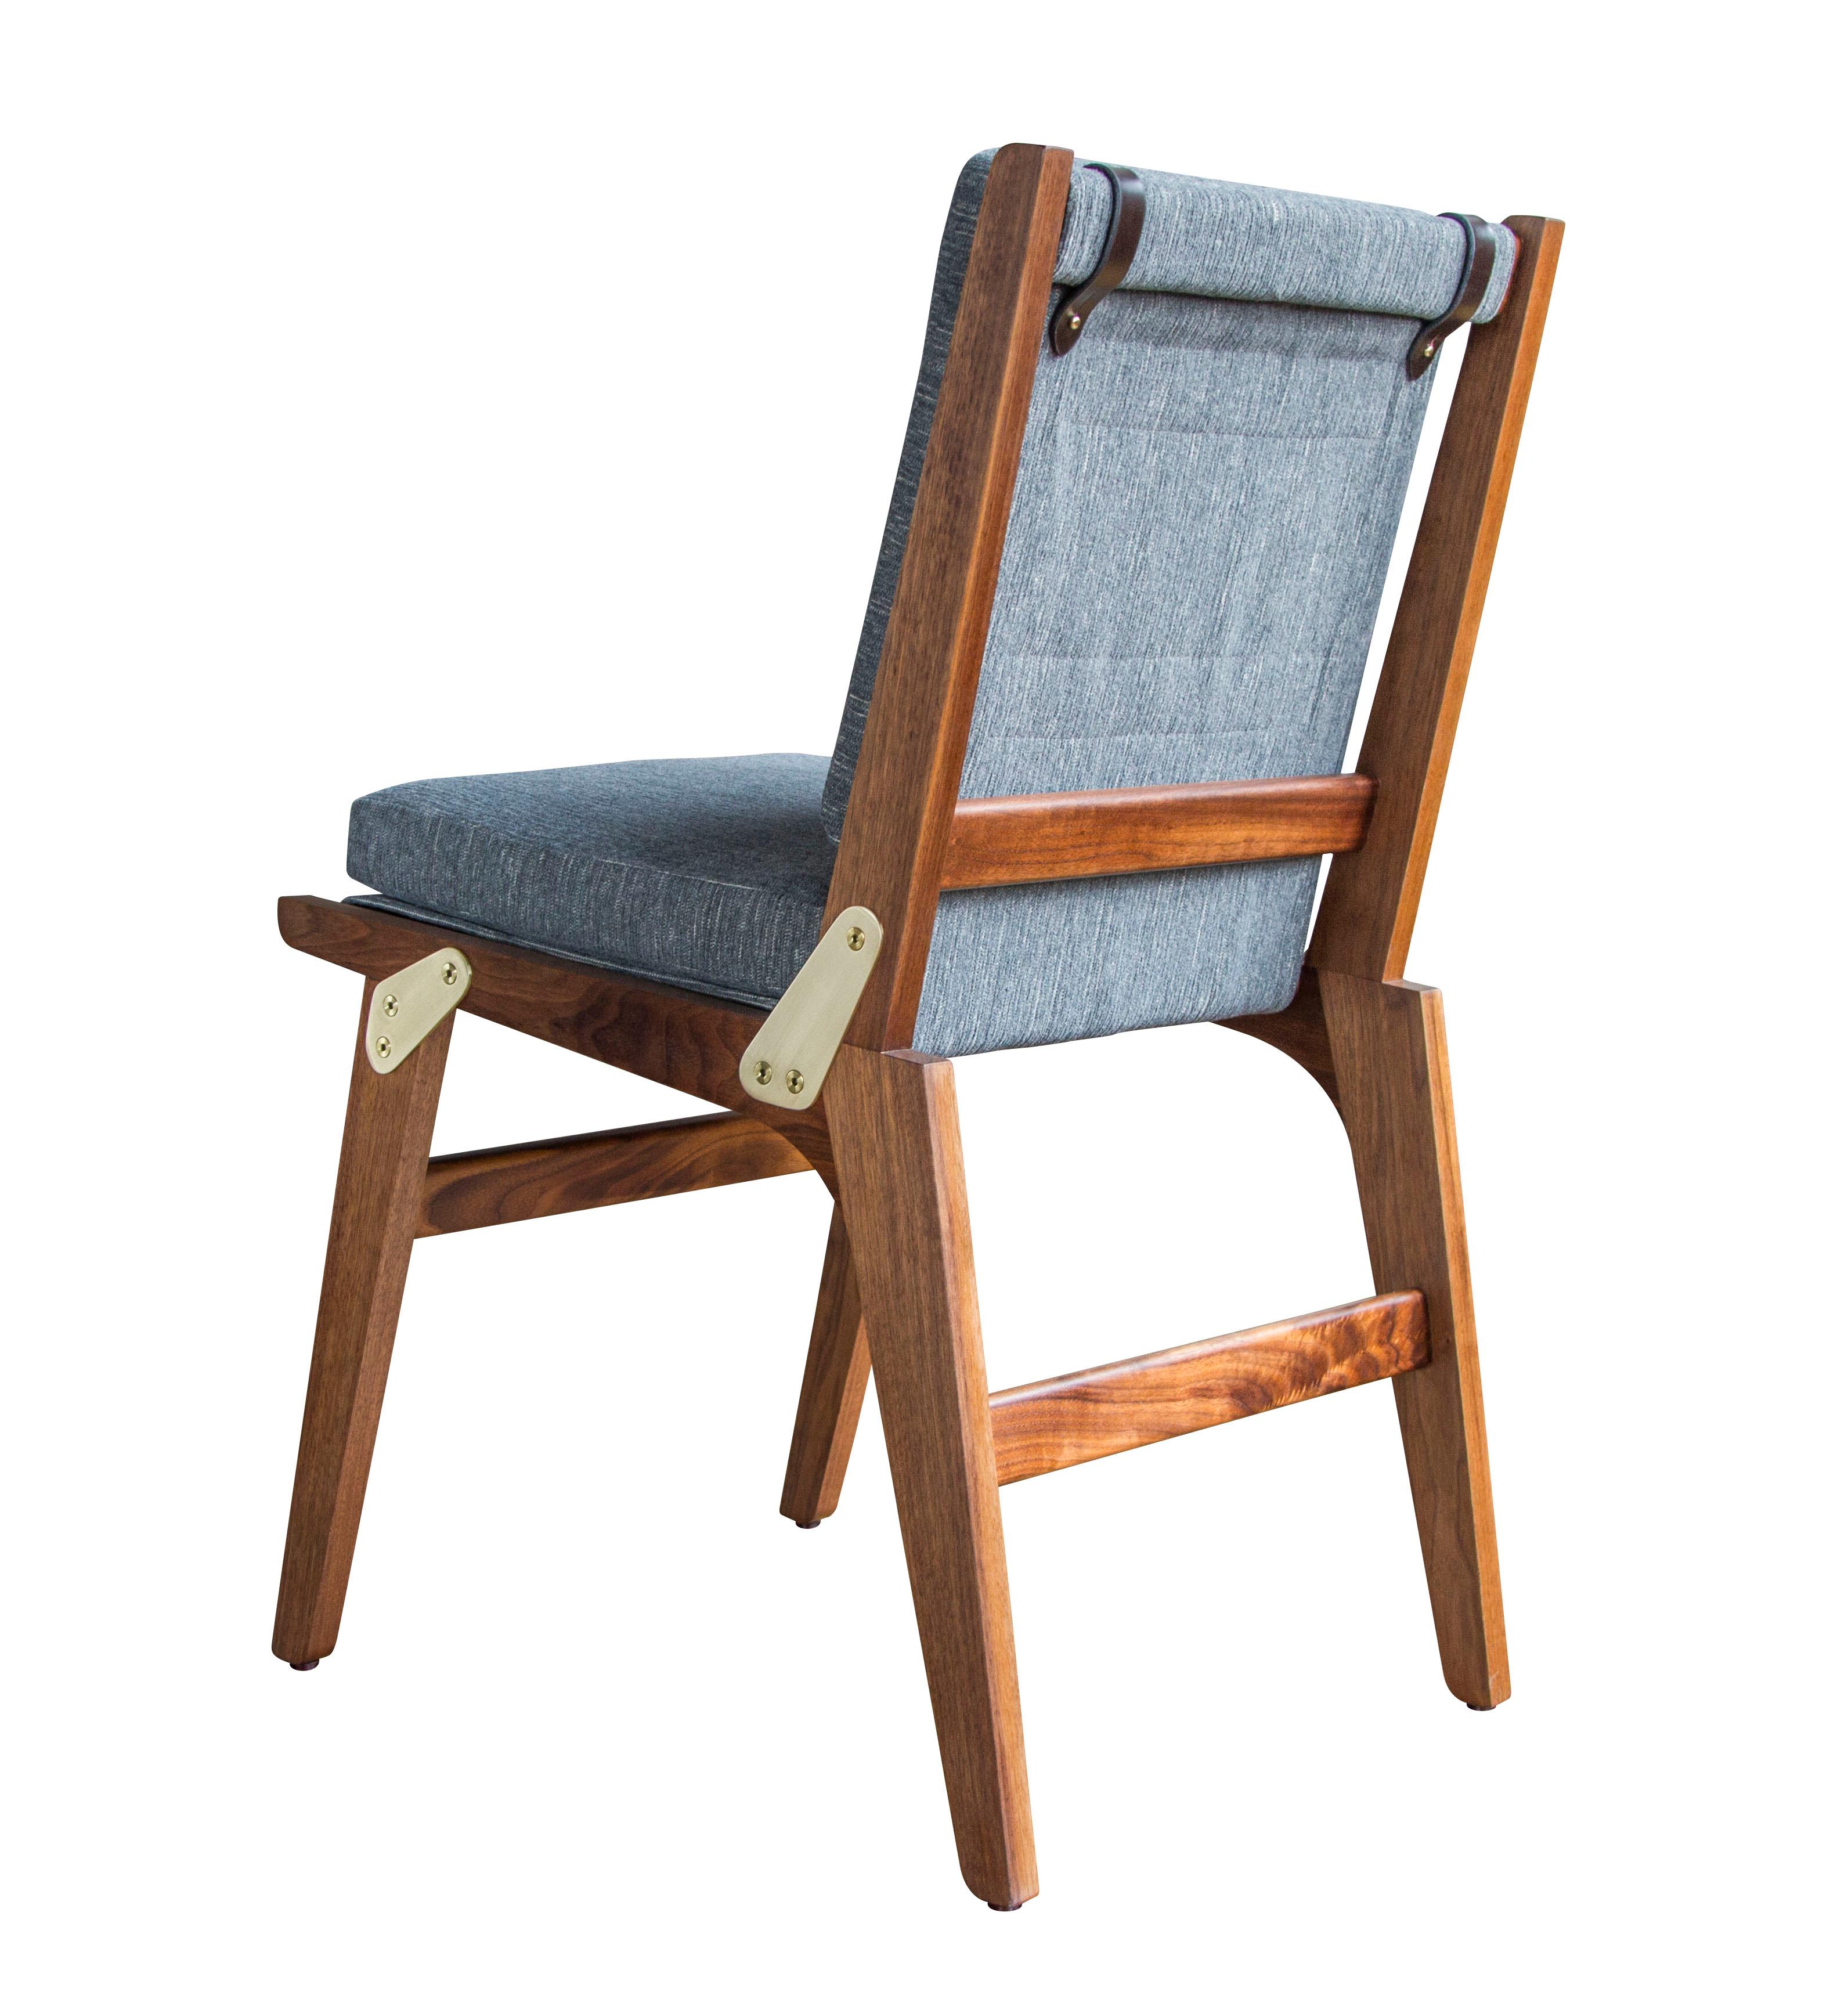 The Officer's Field Set dining chair is shown in oiled walnut, lacquered satin brass and Perennials Fairhaven / Pumice upholstery with dark chocolate English bridle leather accenting straps, and in the non-folding version. 

The modern campaign